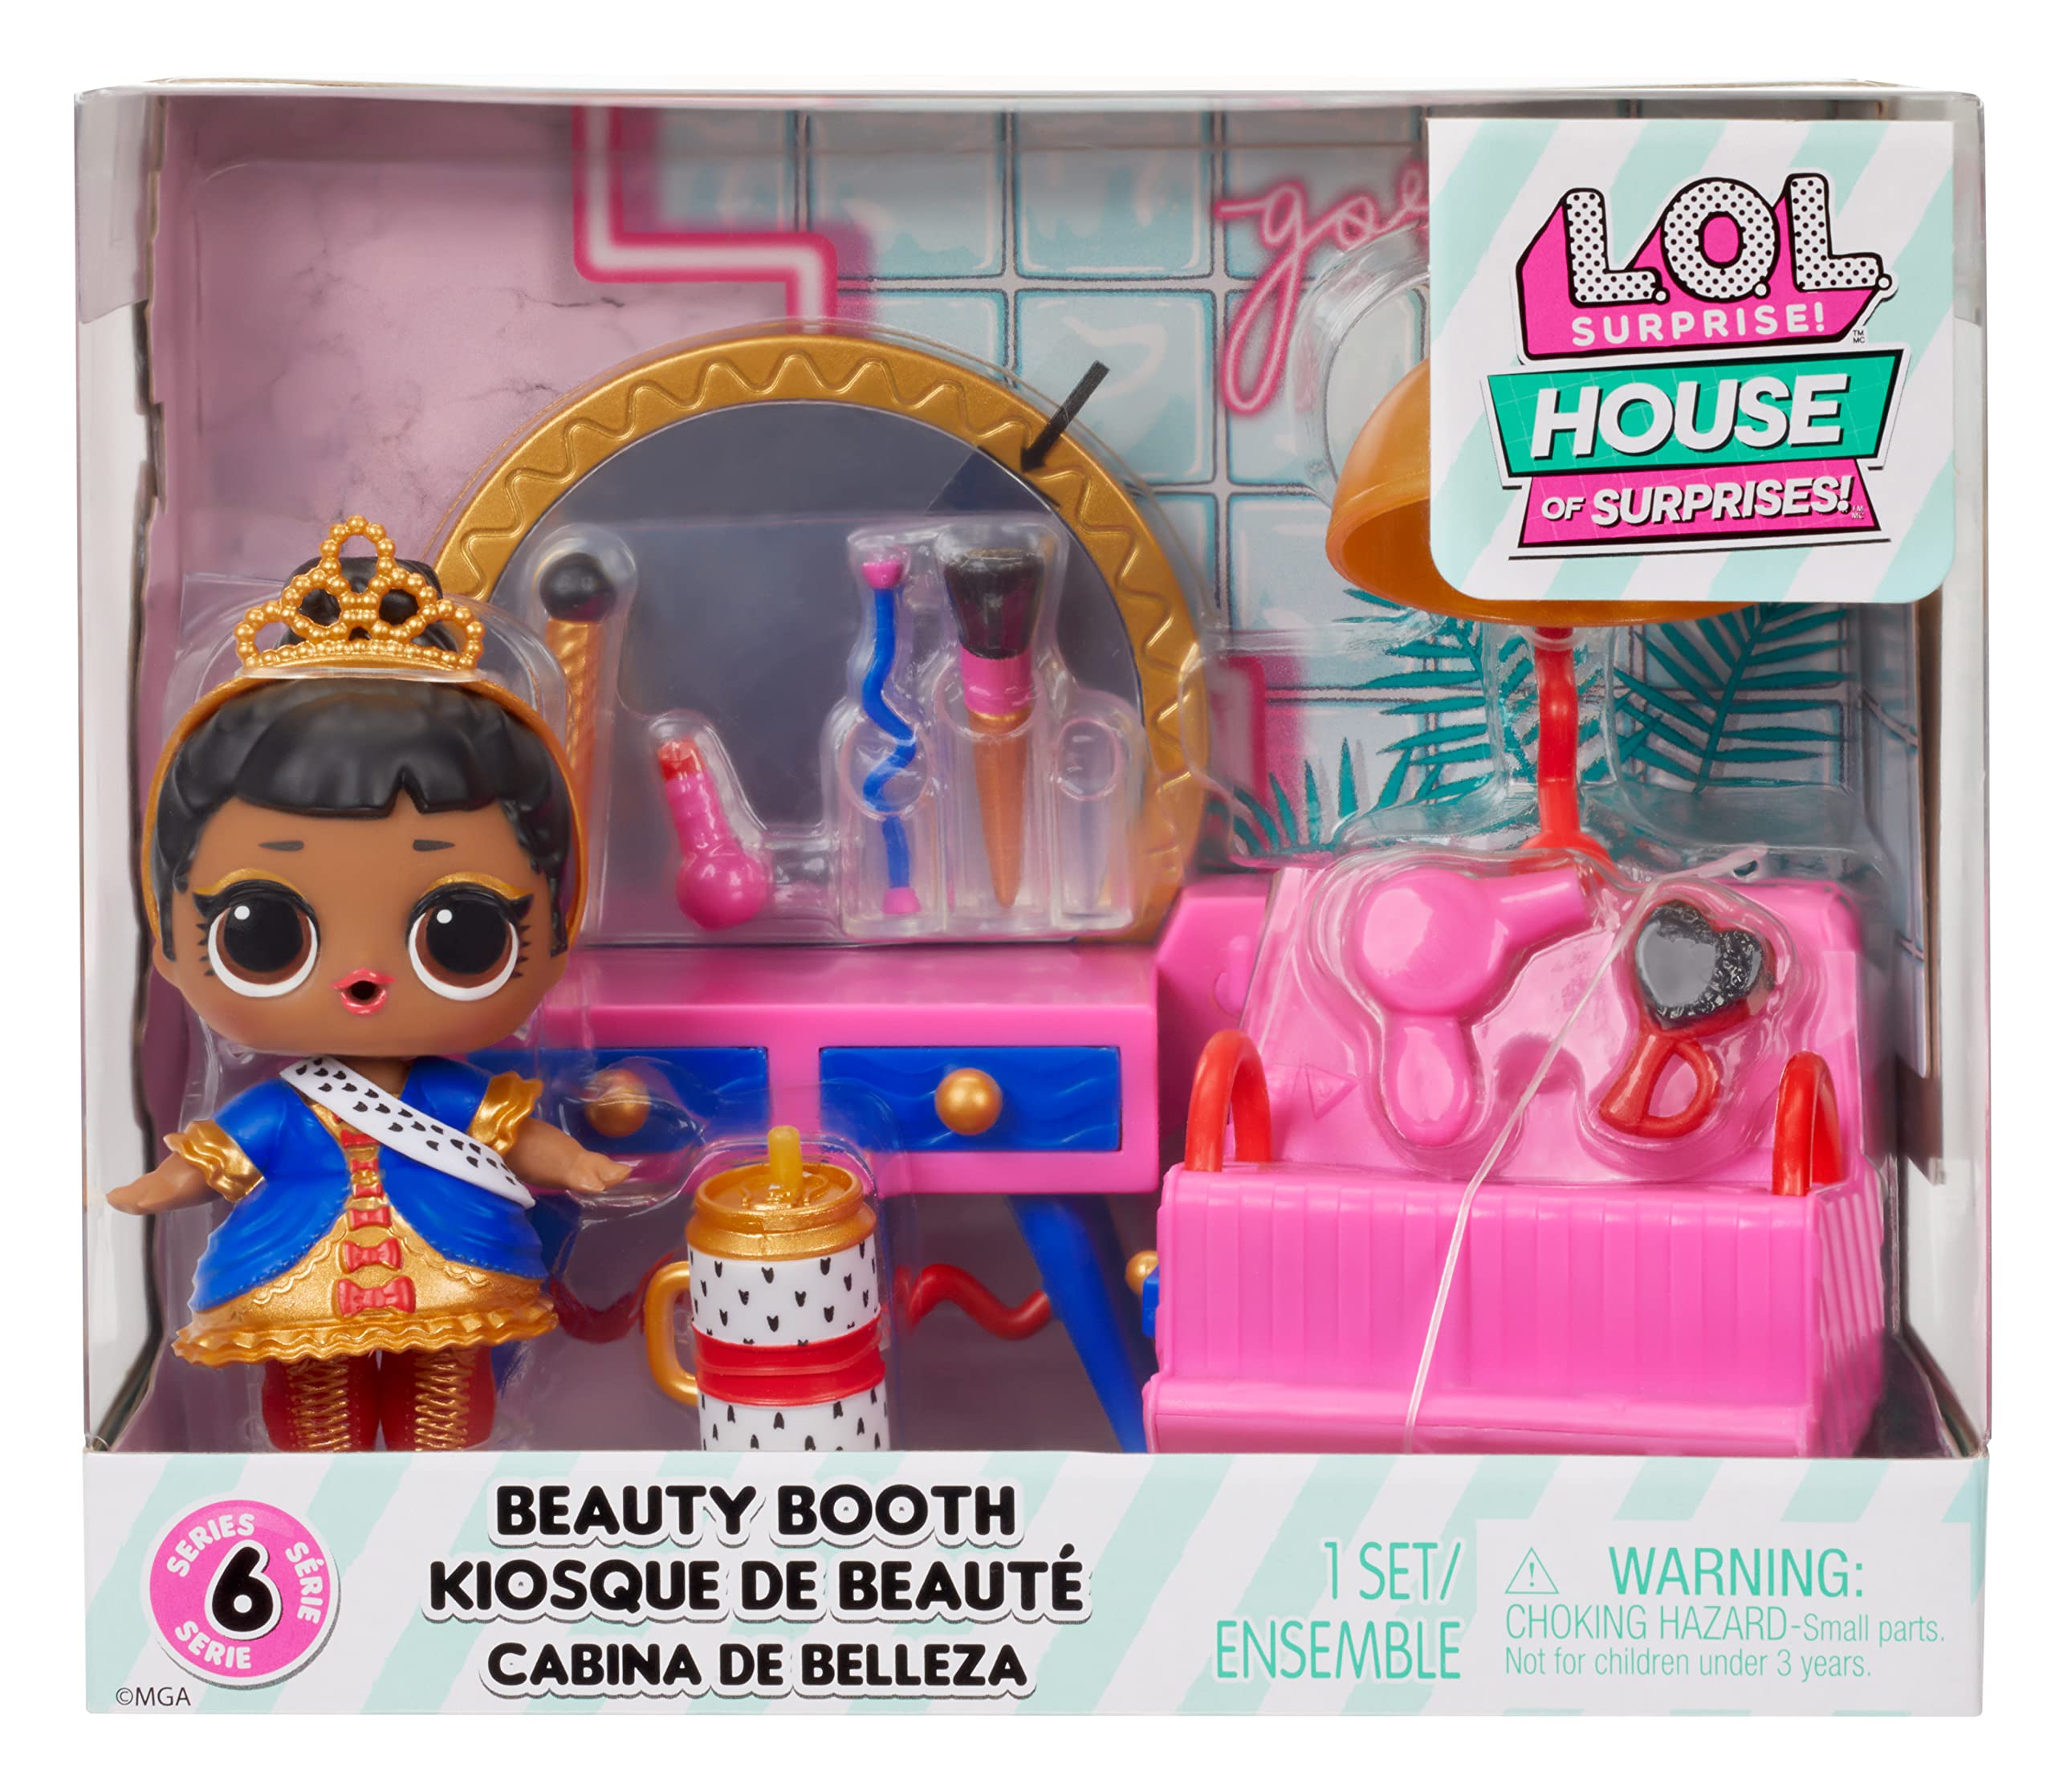 L.O.L. Surprise! OMG House of Surprises Beauty Booth Playset with Her Majesty Collectible Doll and 8 Surprises, Dollhouse Accessories, Holiday Toy, Great Gift for Kids Ages 4 5 6+ Years & Collectors